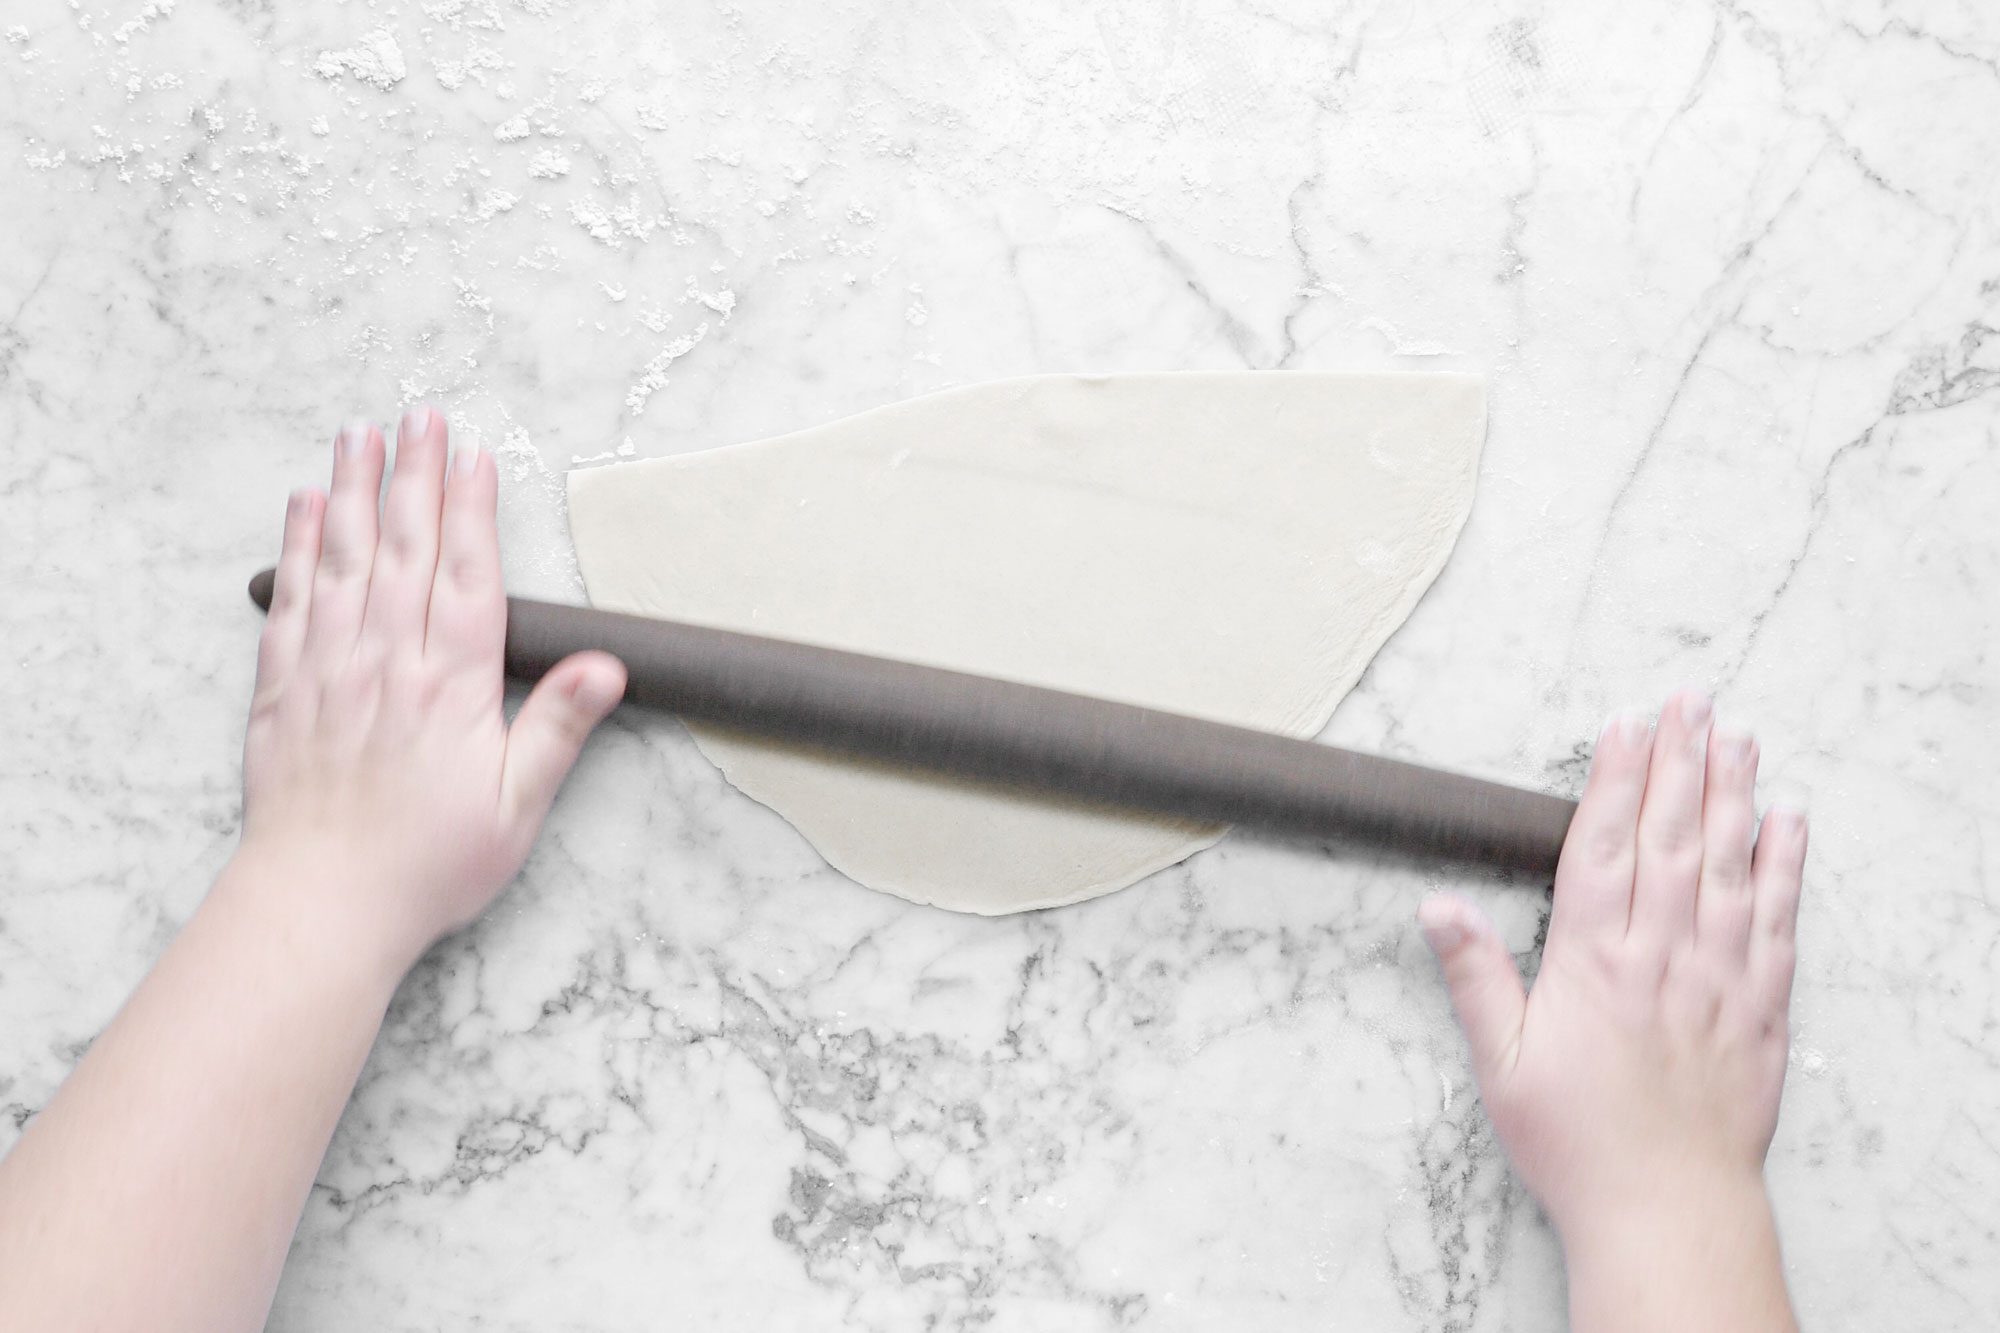 A person's hands roll out dough with a rolling pin on a marble surface